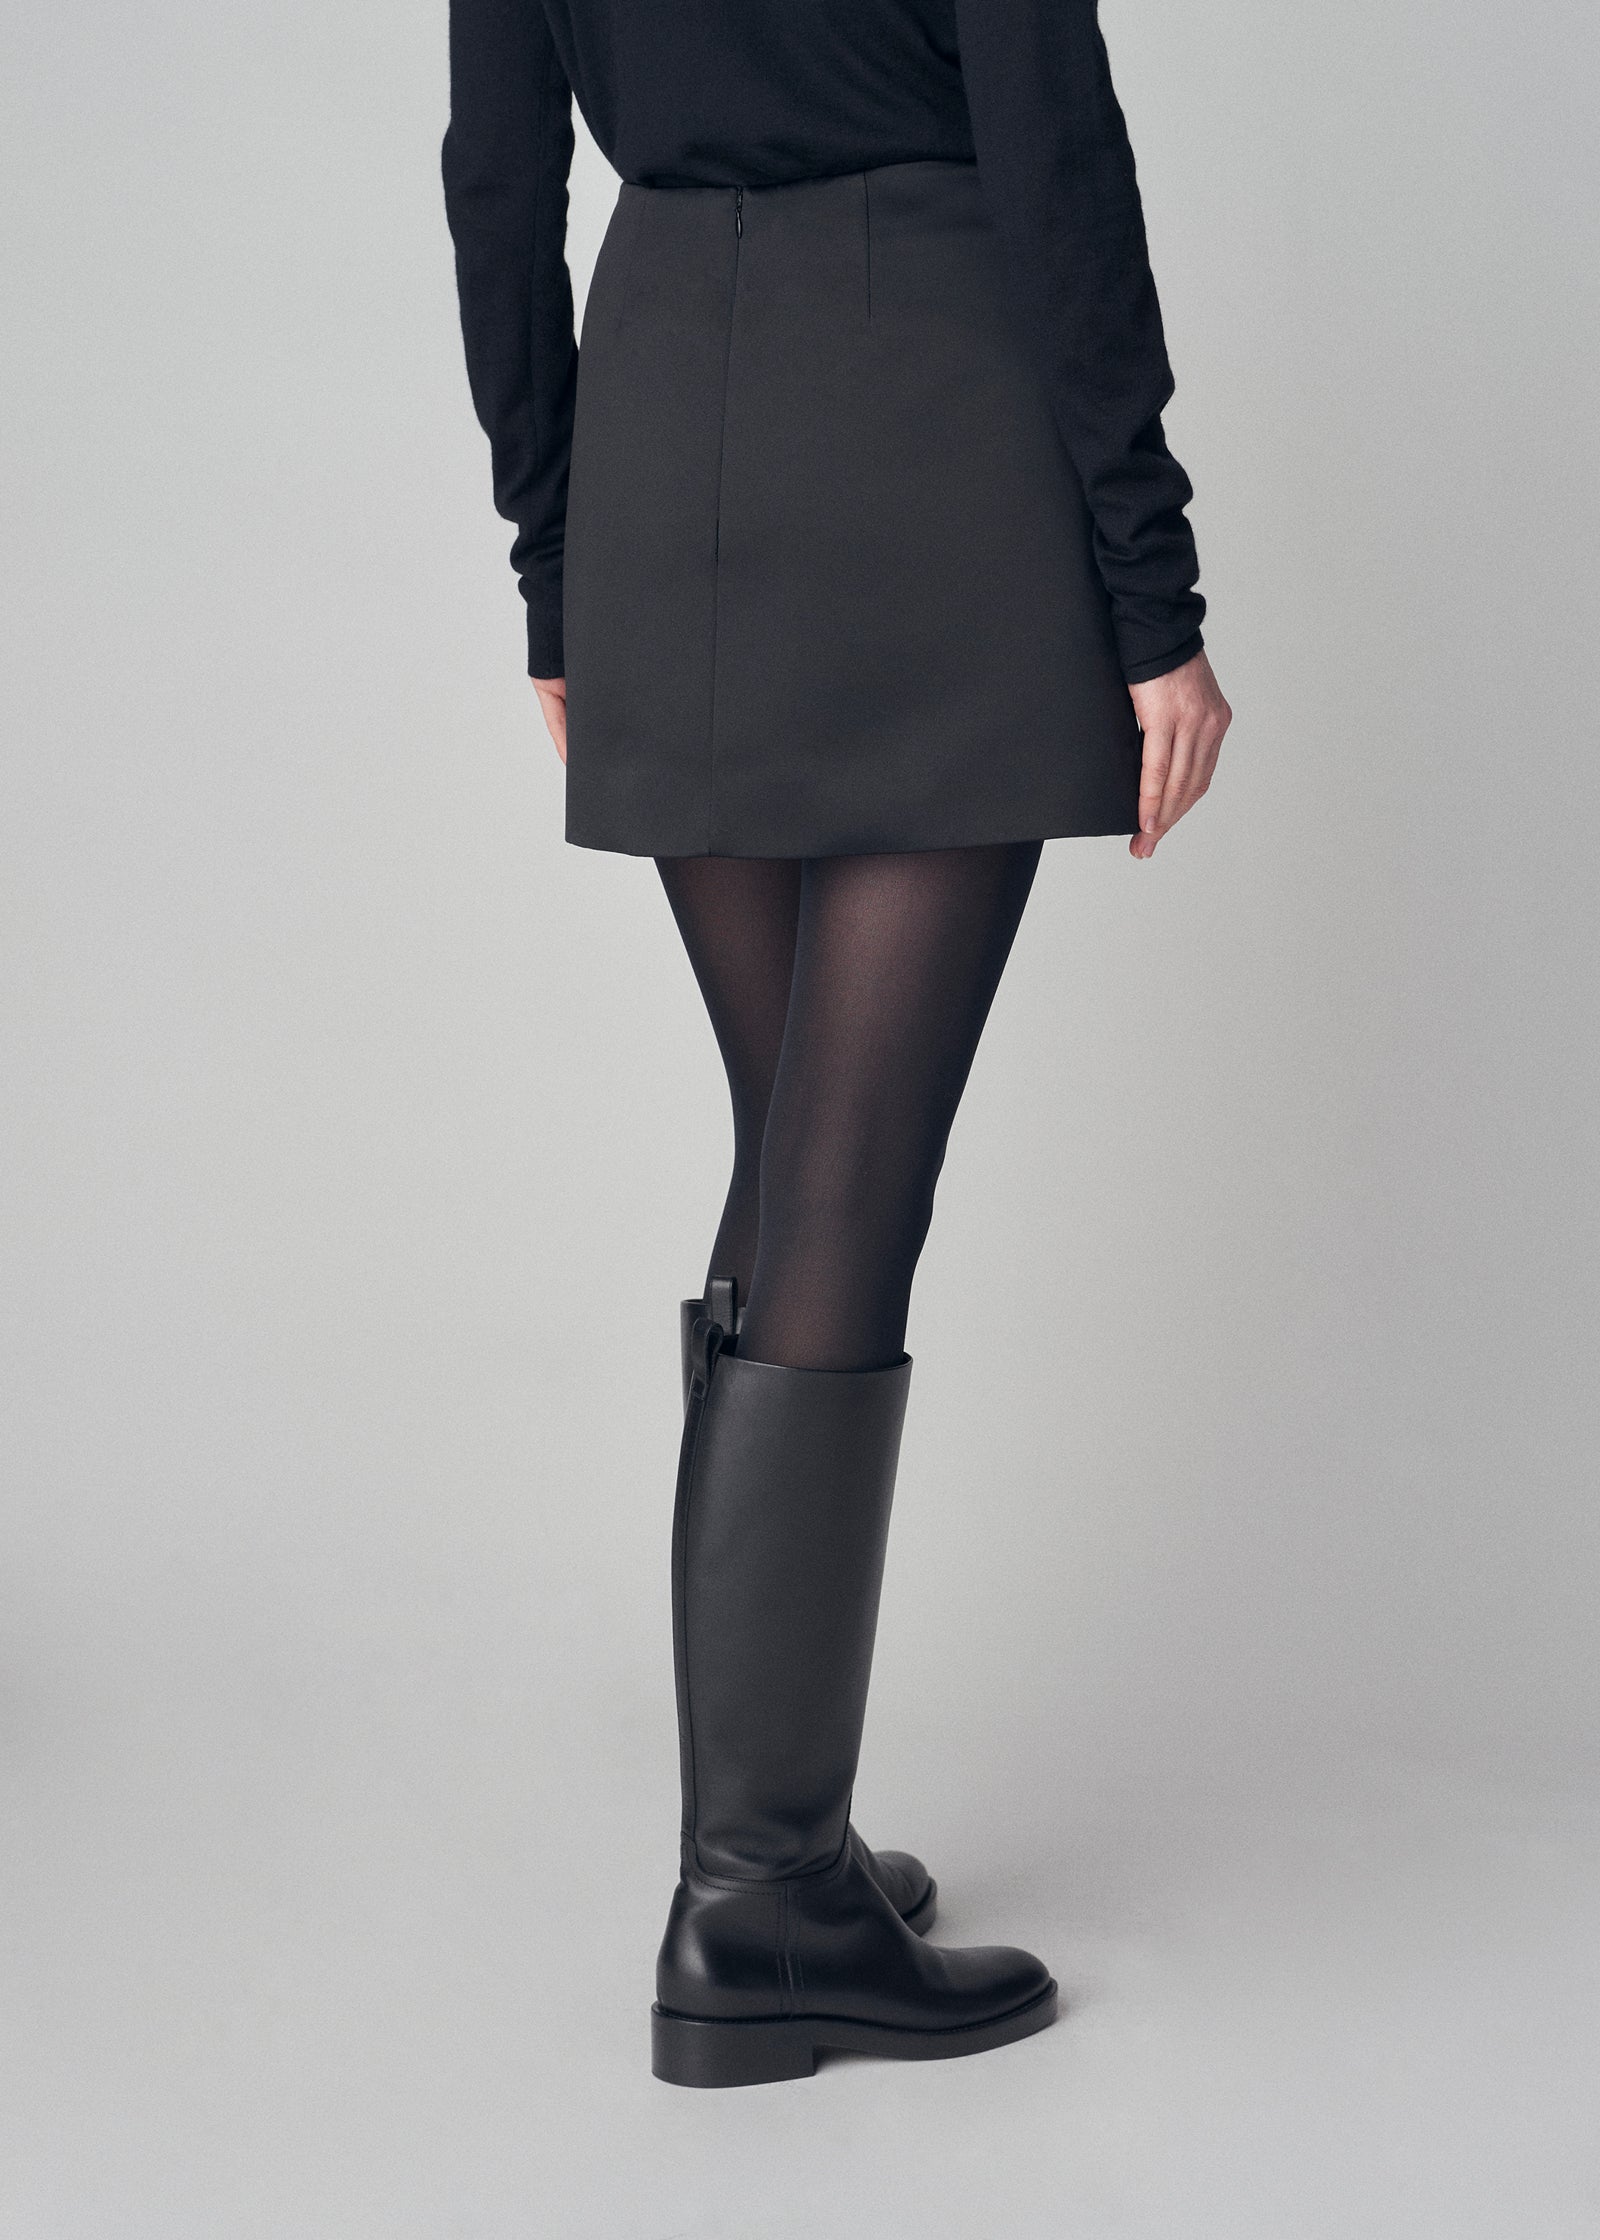 A-Line Mini Skirt in Bonded Satin - Black - CO Collections